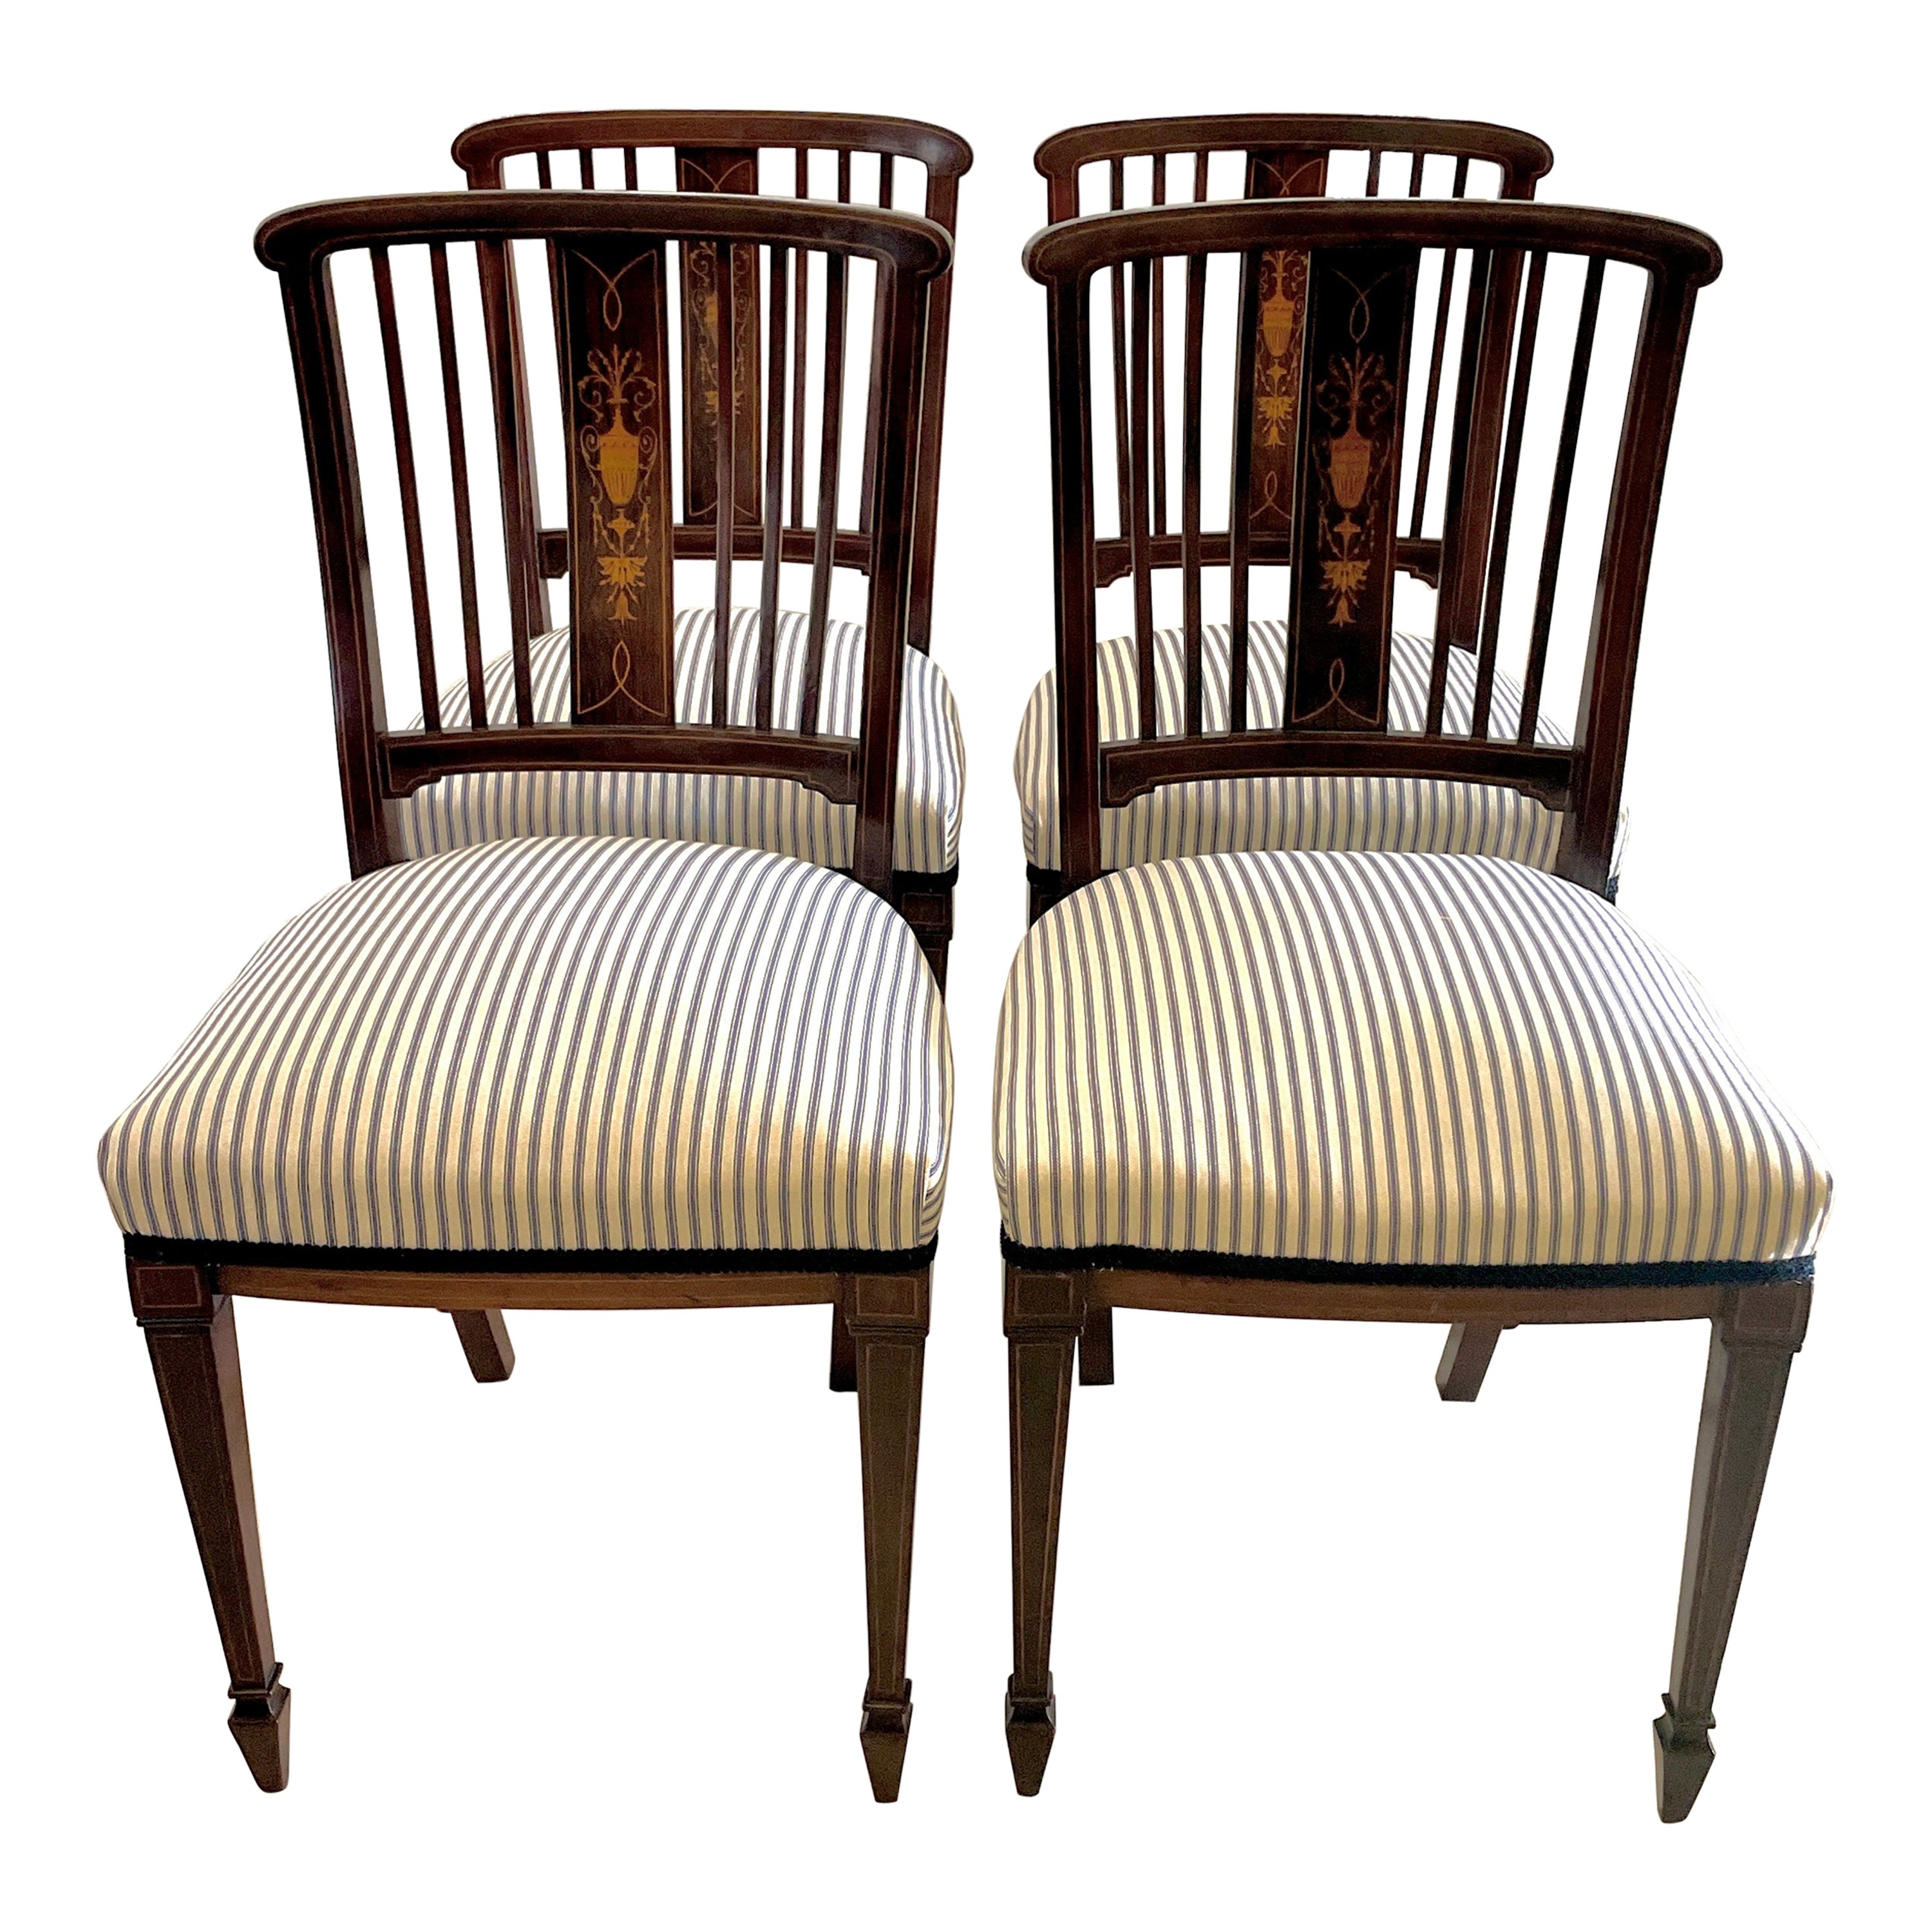 Set of 4 Antique Edwardian Quality Mahogany Inlaid Dining Chairs